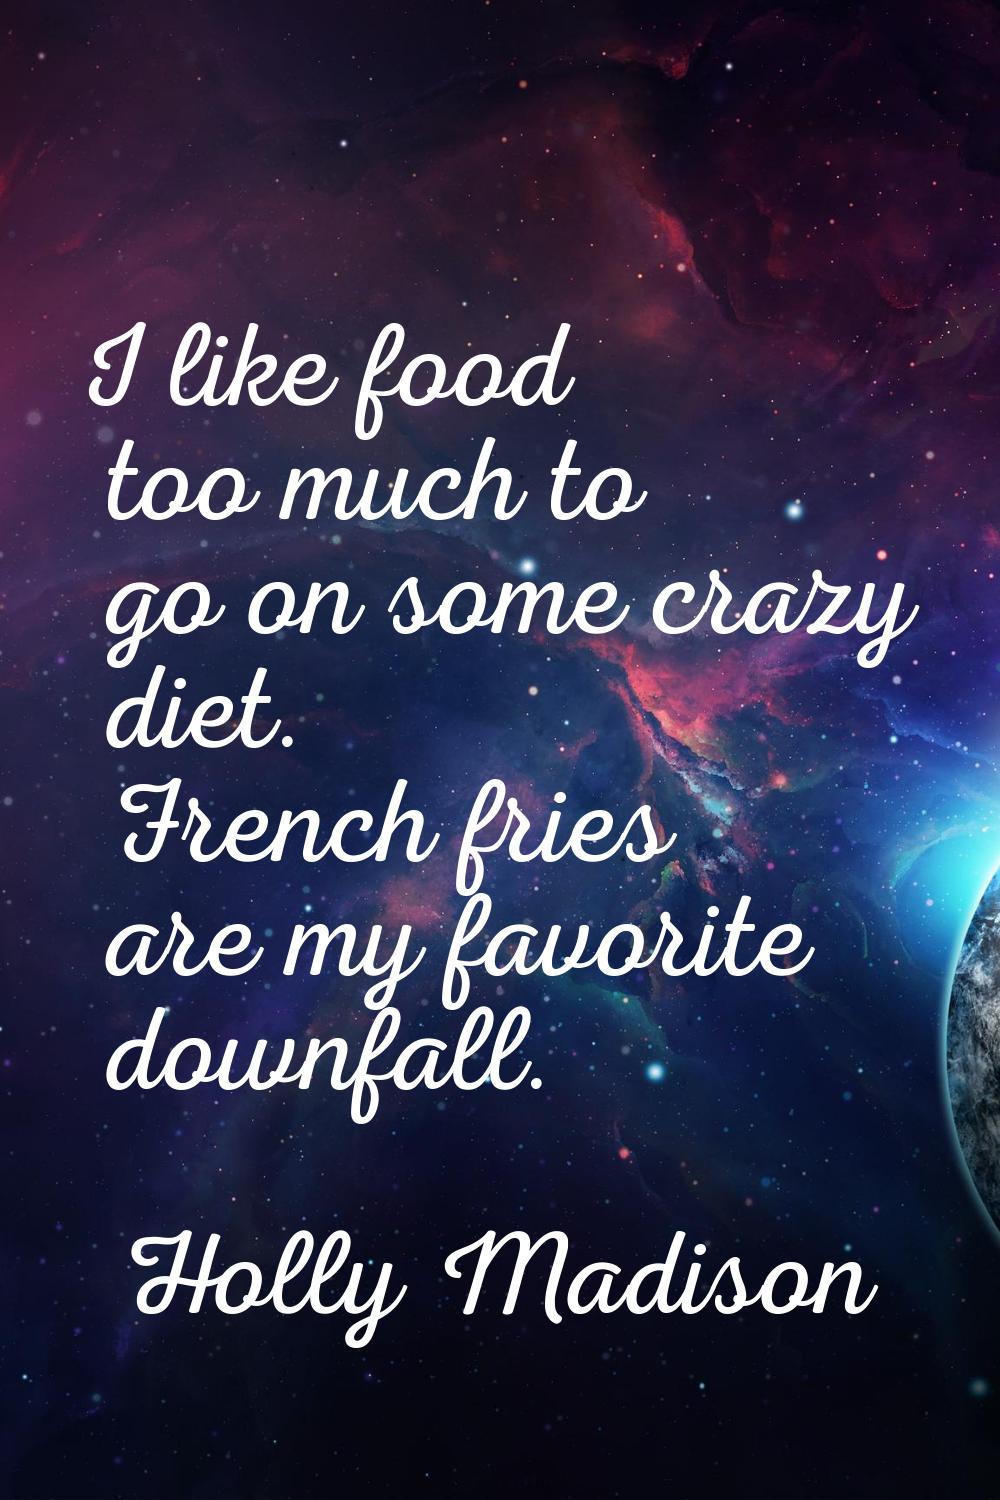 I like food too much to go on some crazy diet. French fries are my favorite downfall.